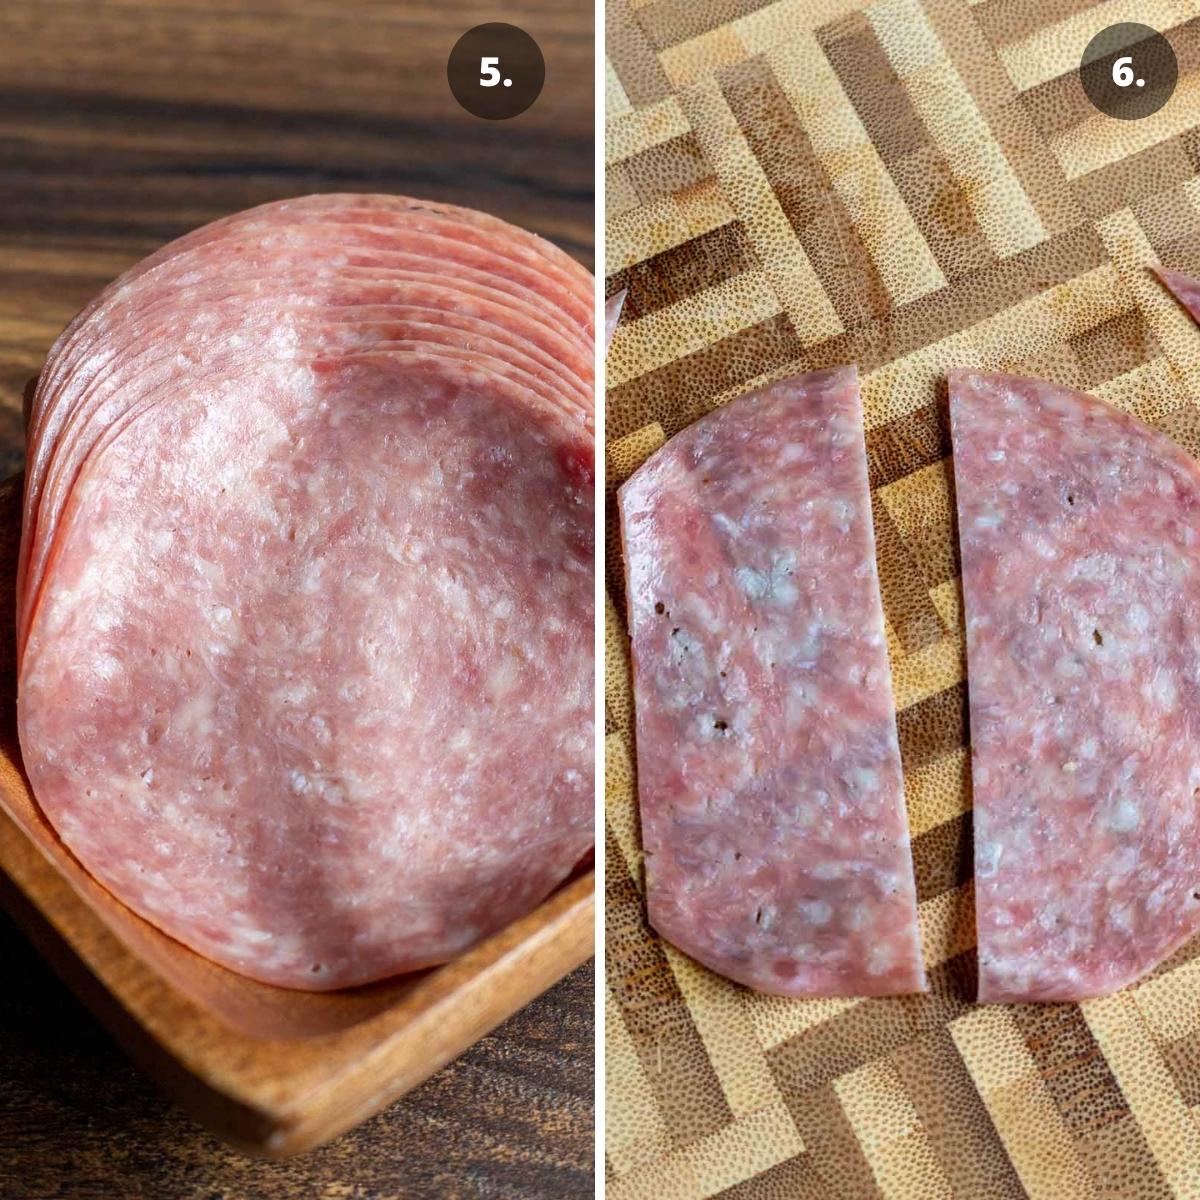 Salami slices trimmed and cut in half.